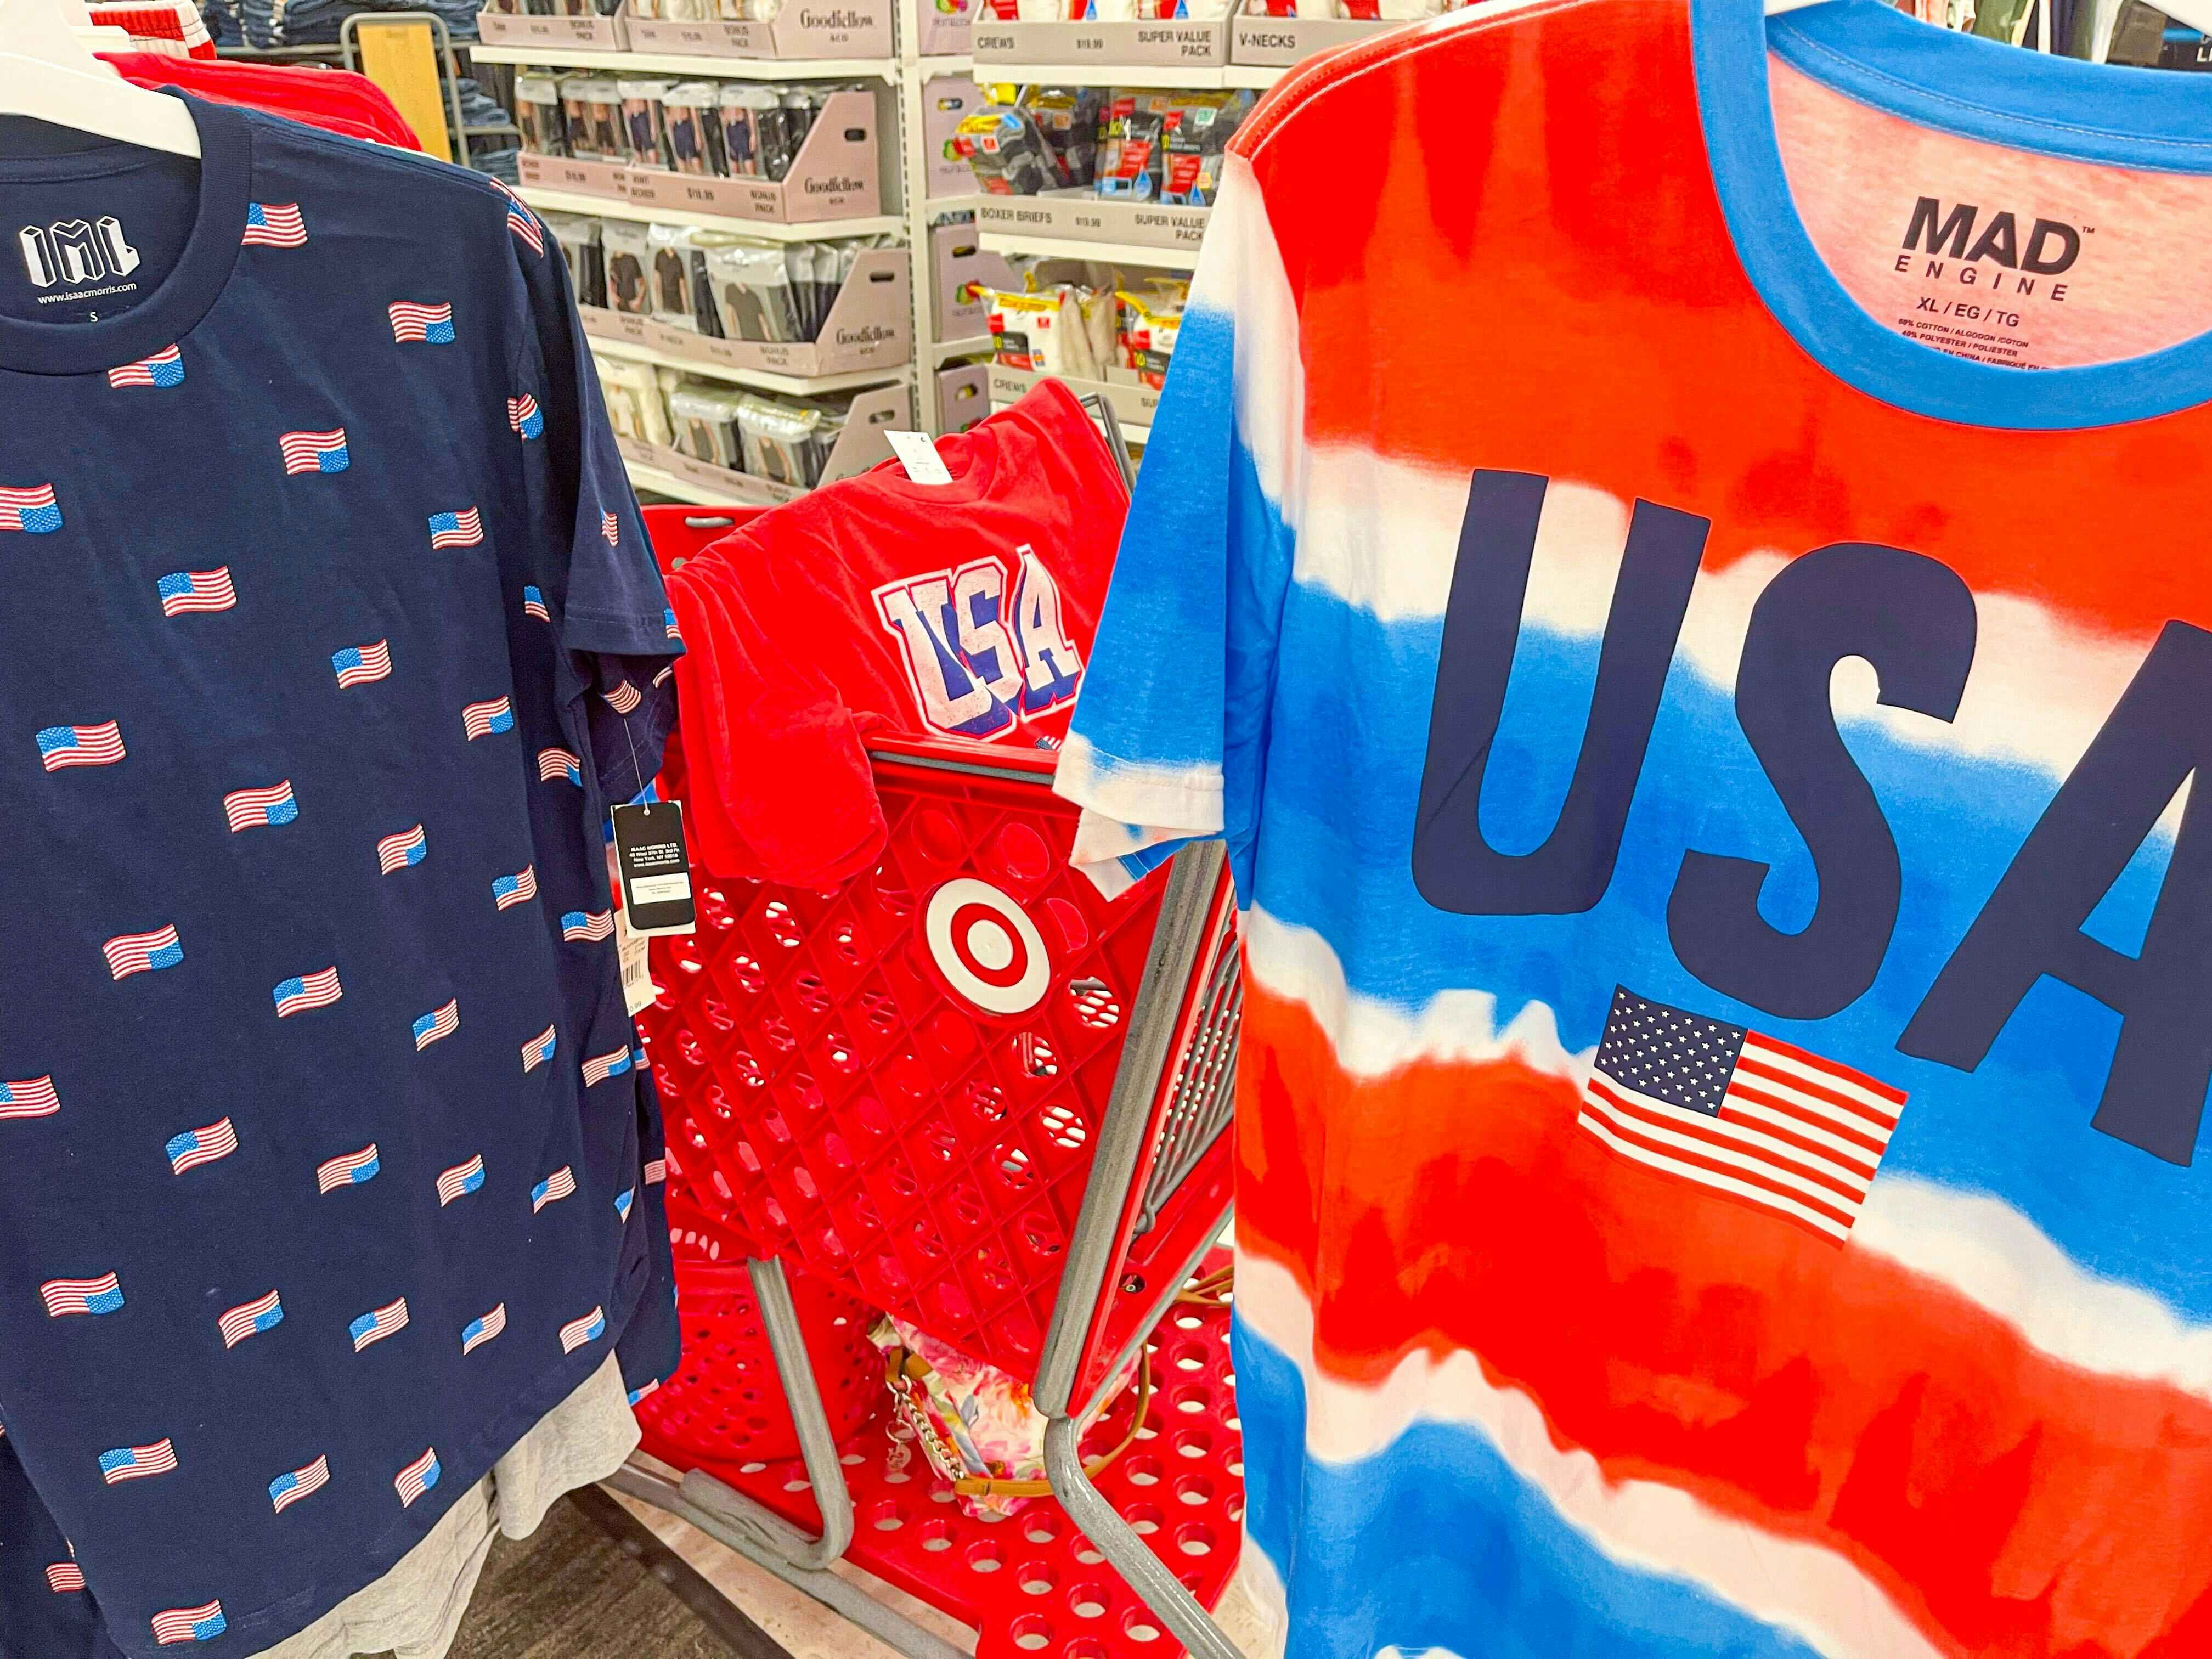 USA themed tees in front of Target shopping cart